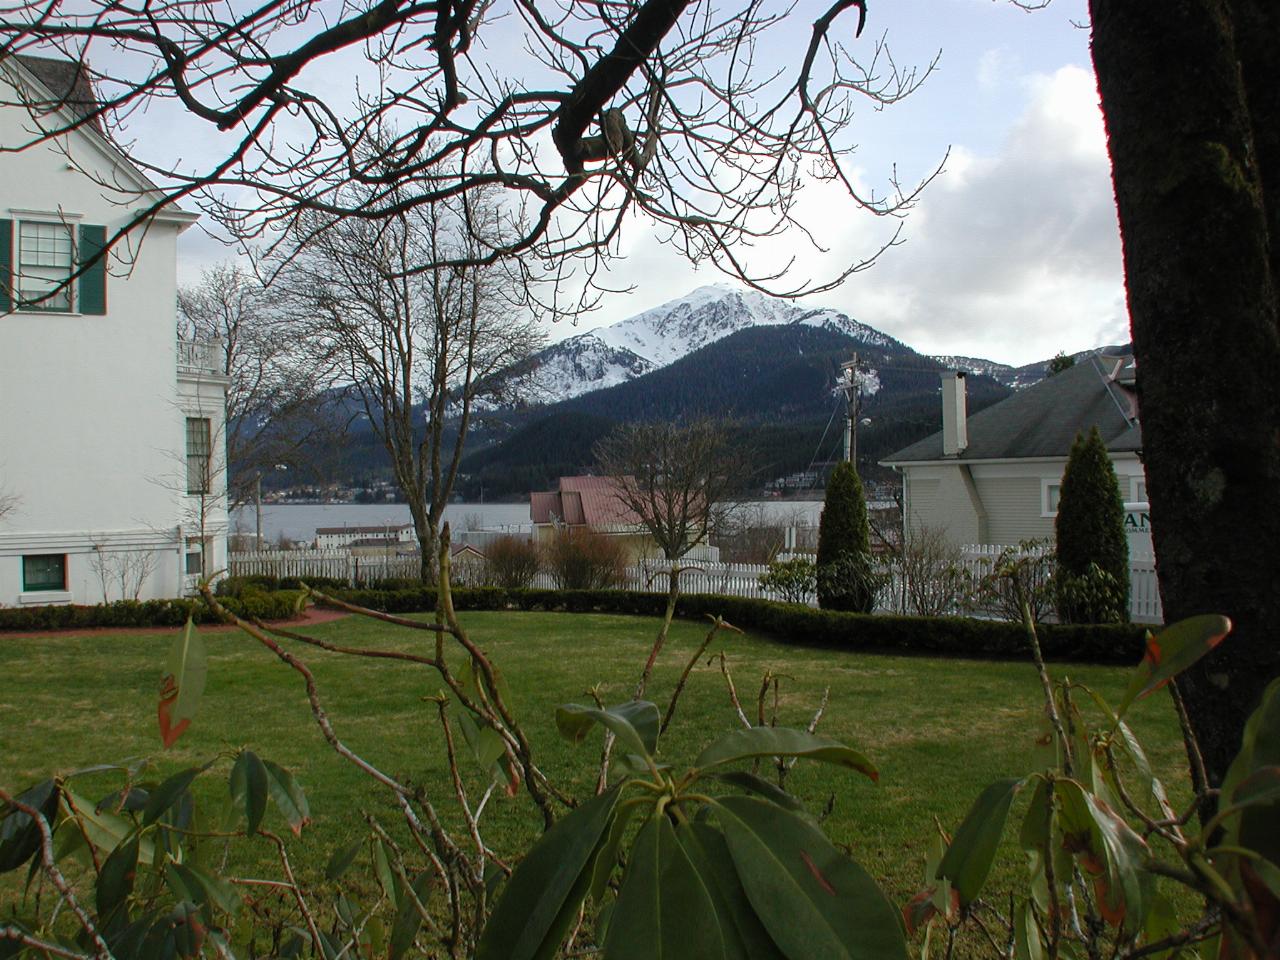 Governor's Mansion, Juneau and view over Gastineau Channel to Douglas Island